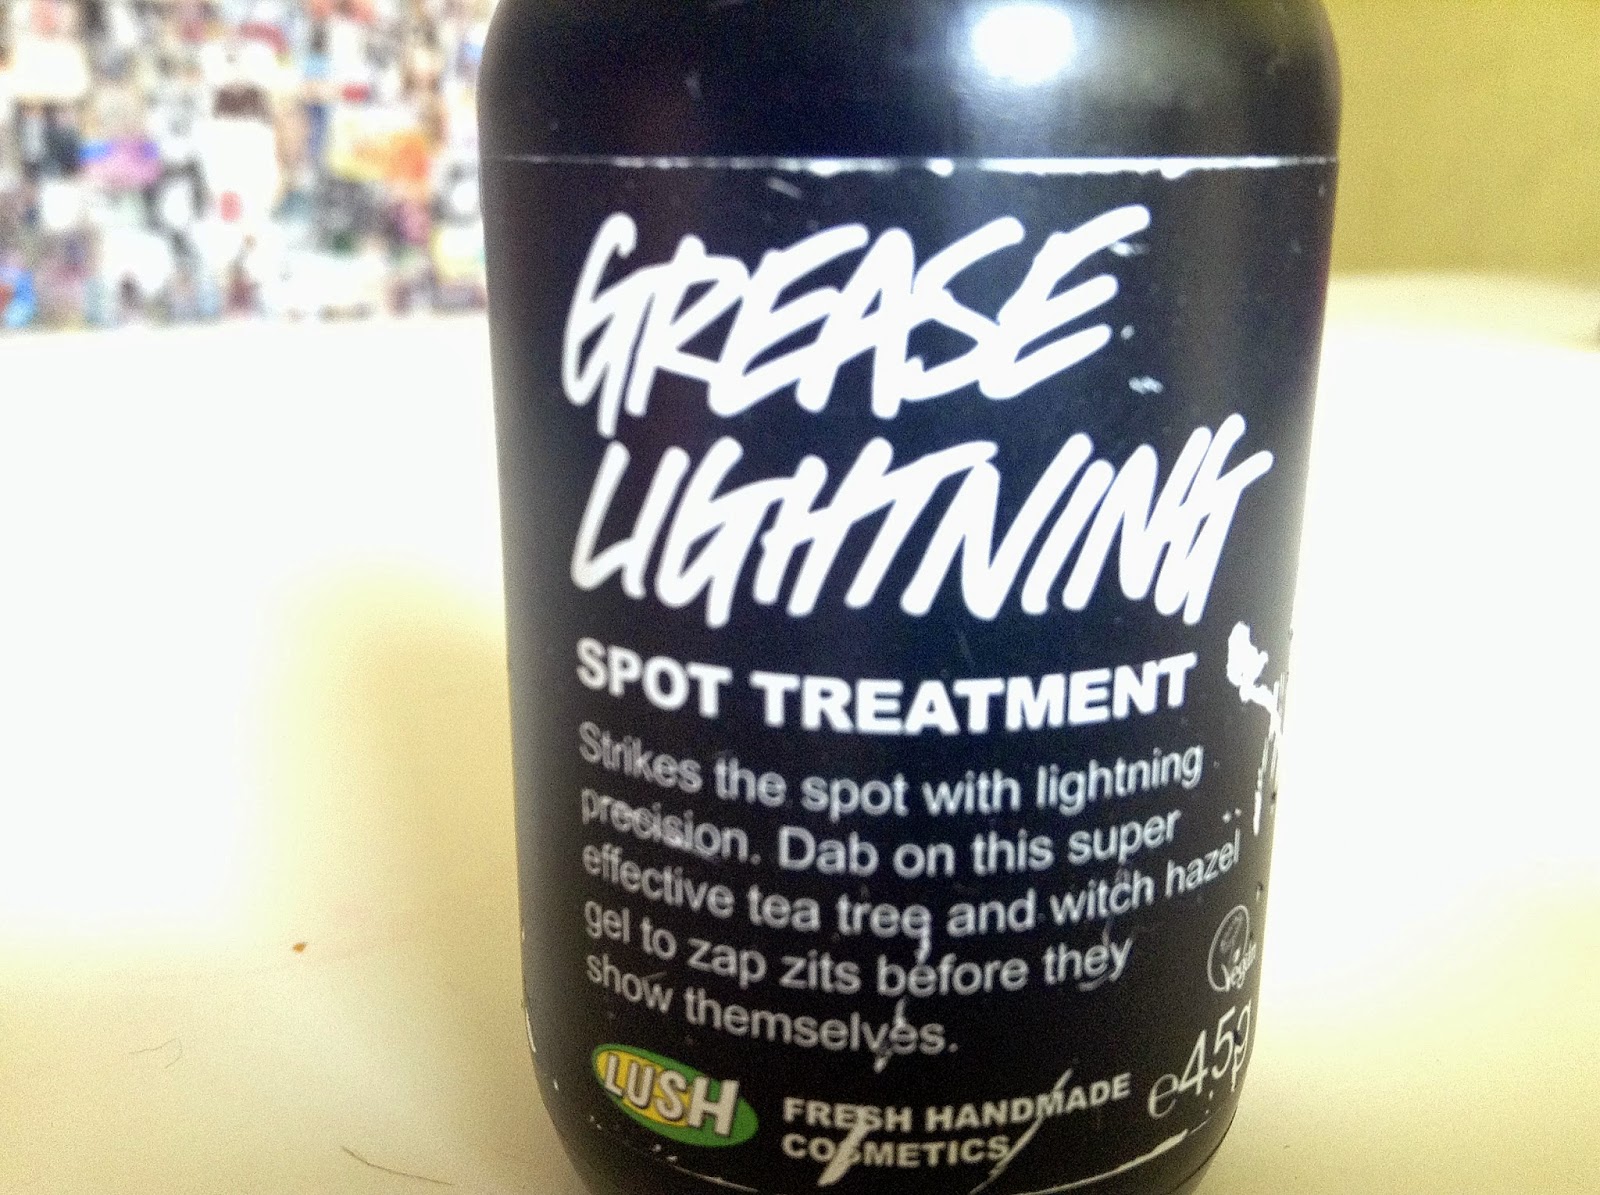 lush greased lightning spot treatment review